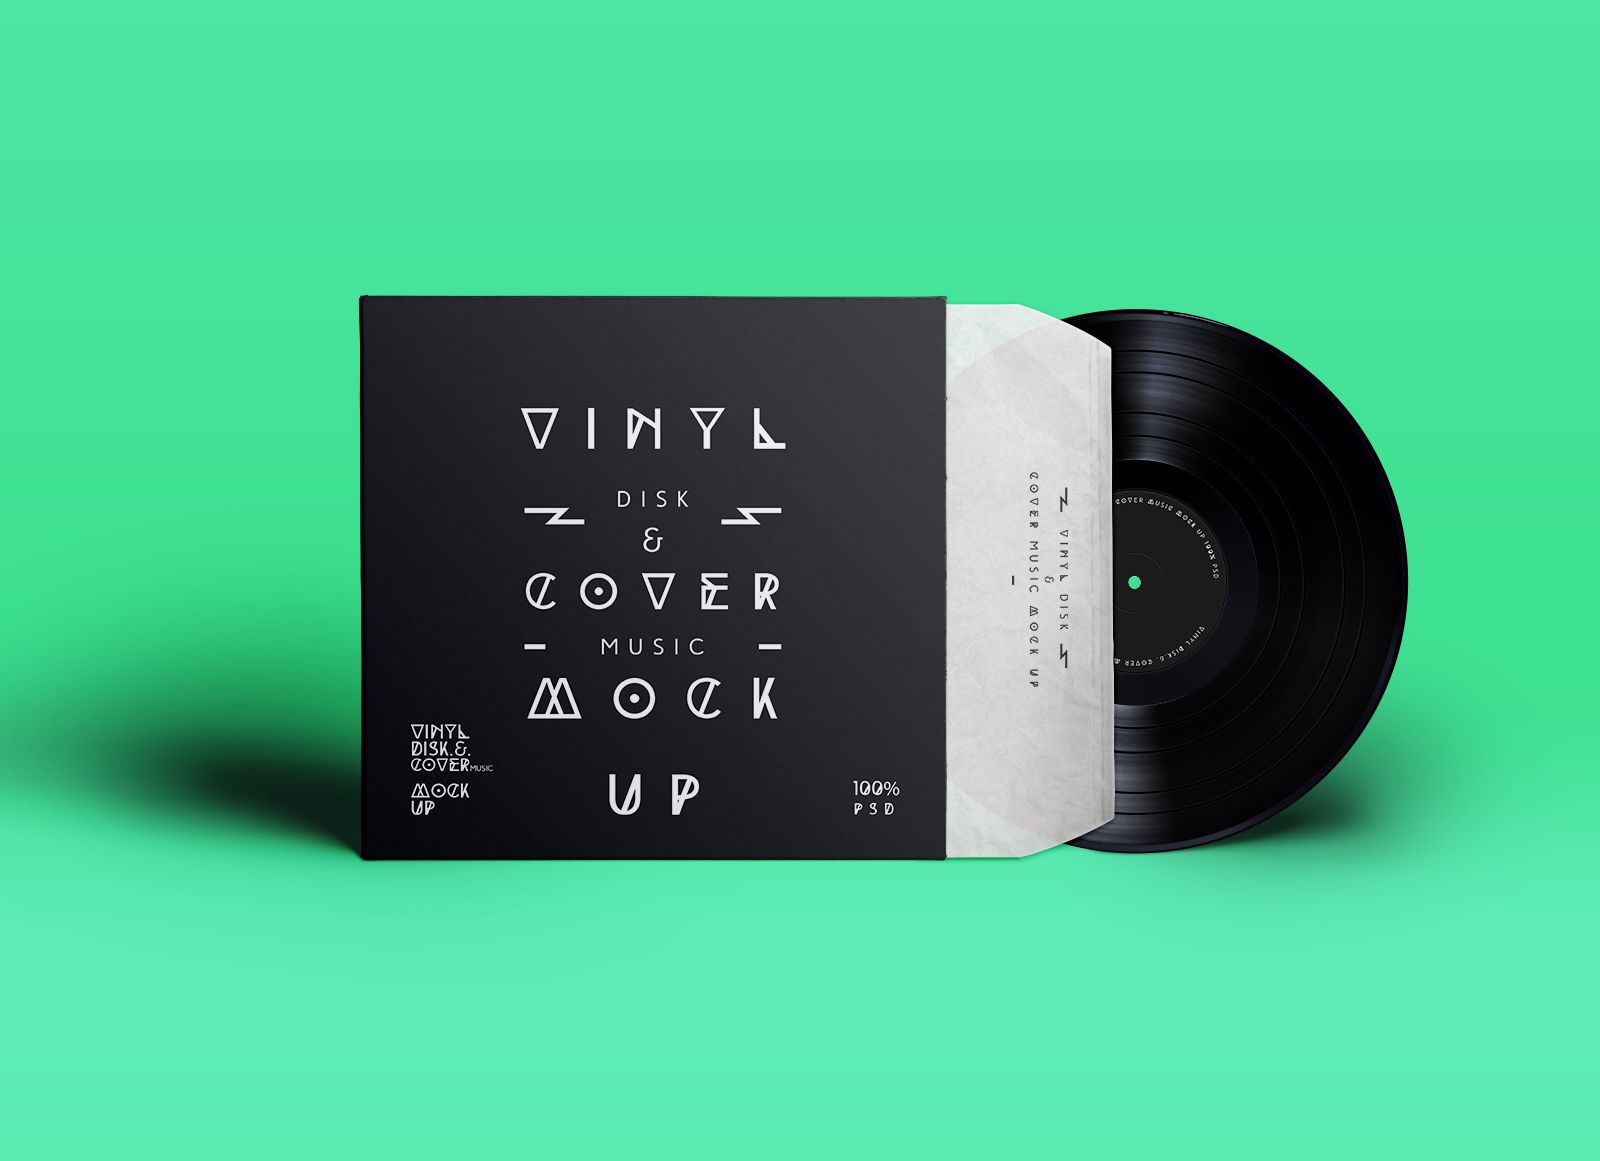 Vinyl Record Disc & Cover Packaging Mockup